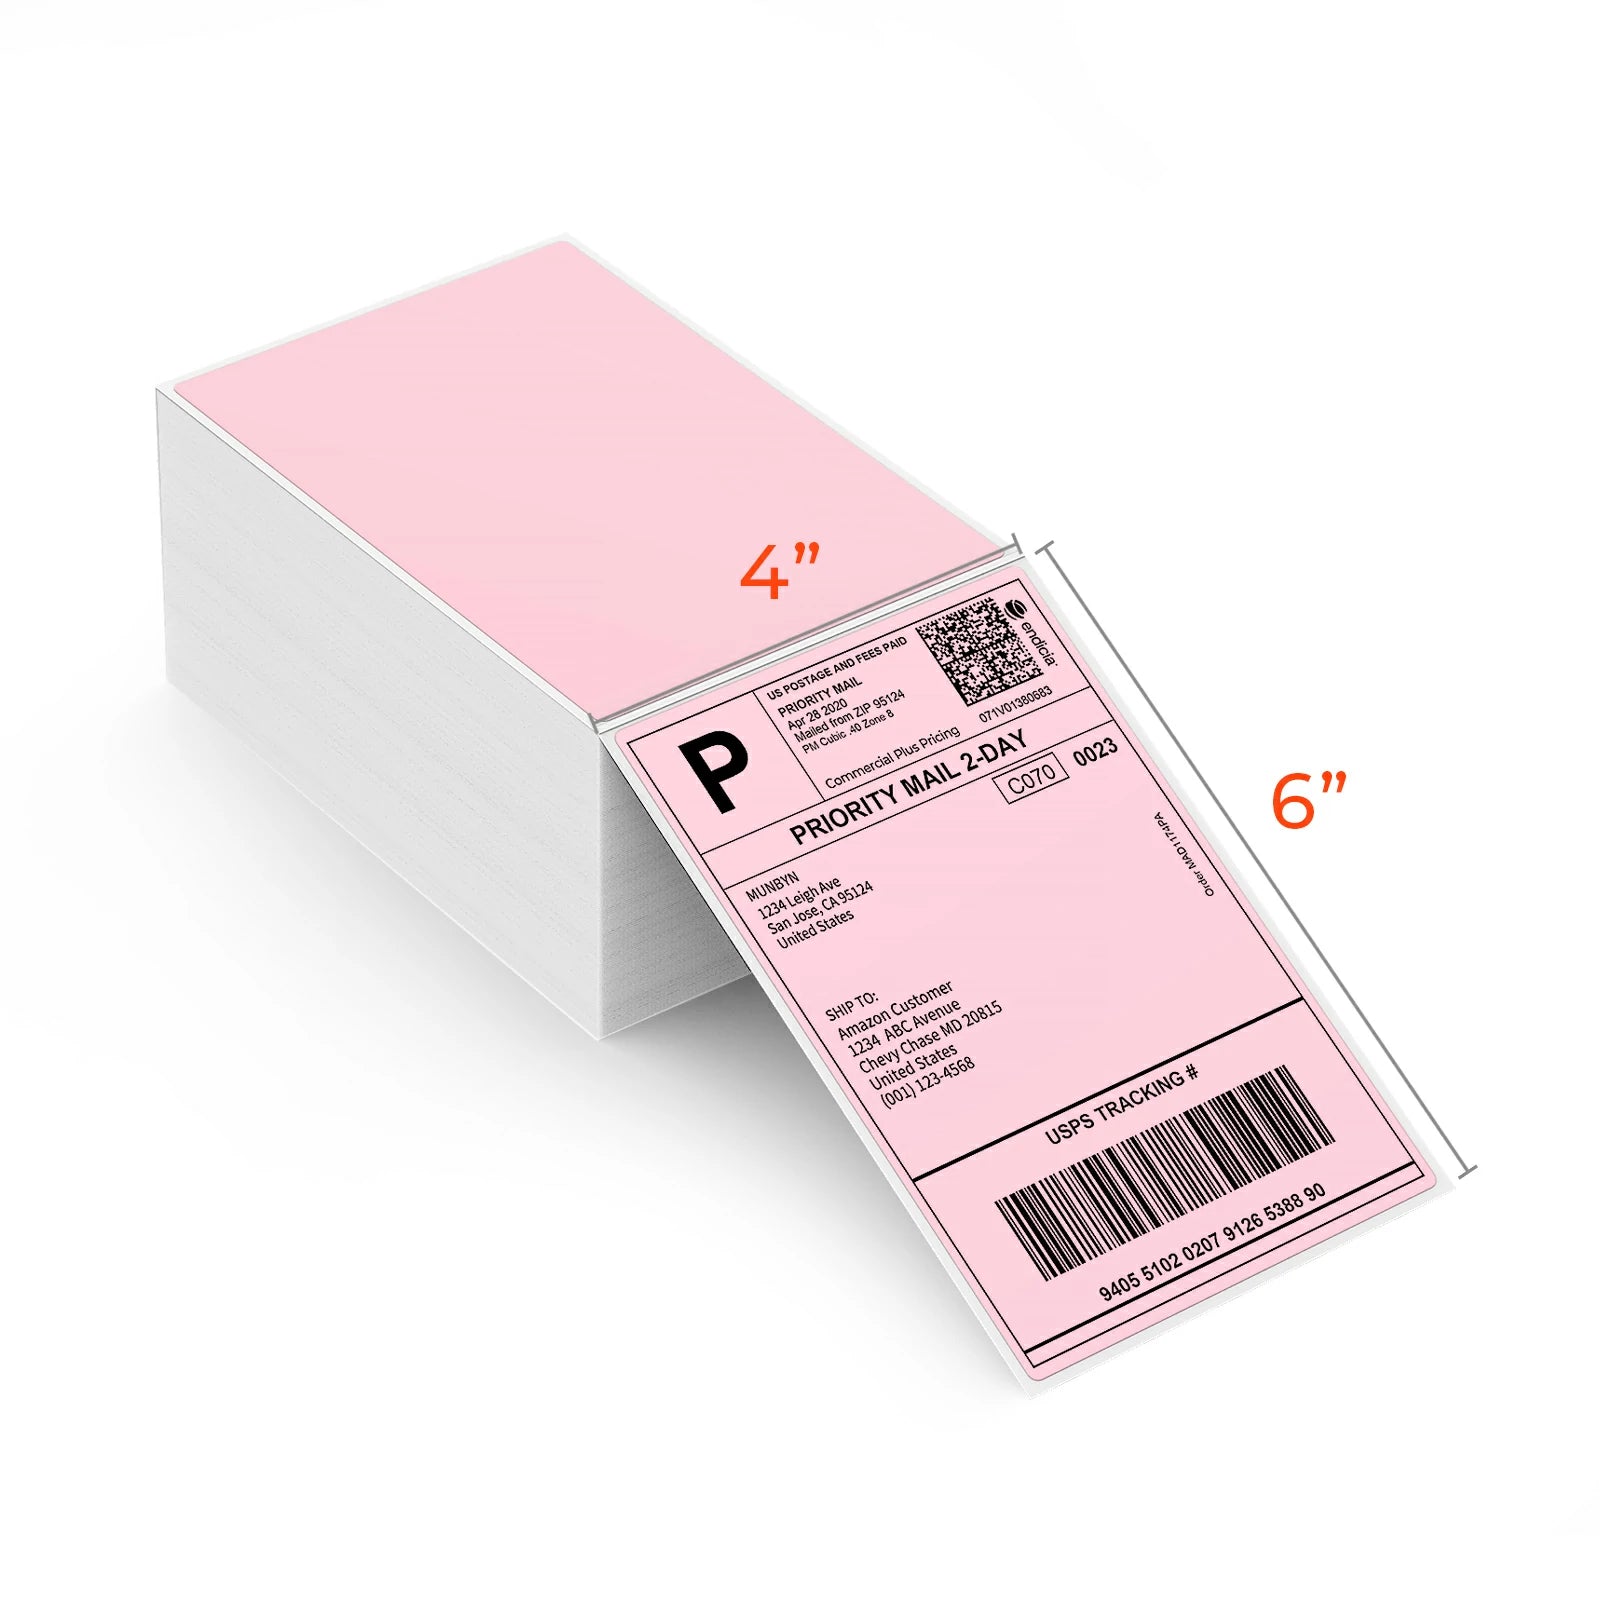 MUNBYN pink thermal labels feature a 4x6 inch size, providing ample space for printing detailed information or images.